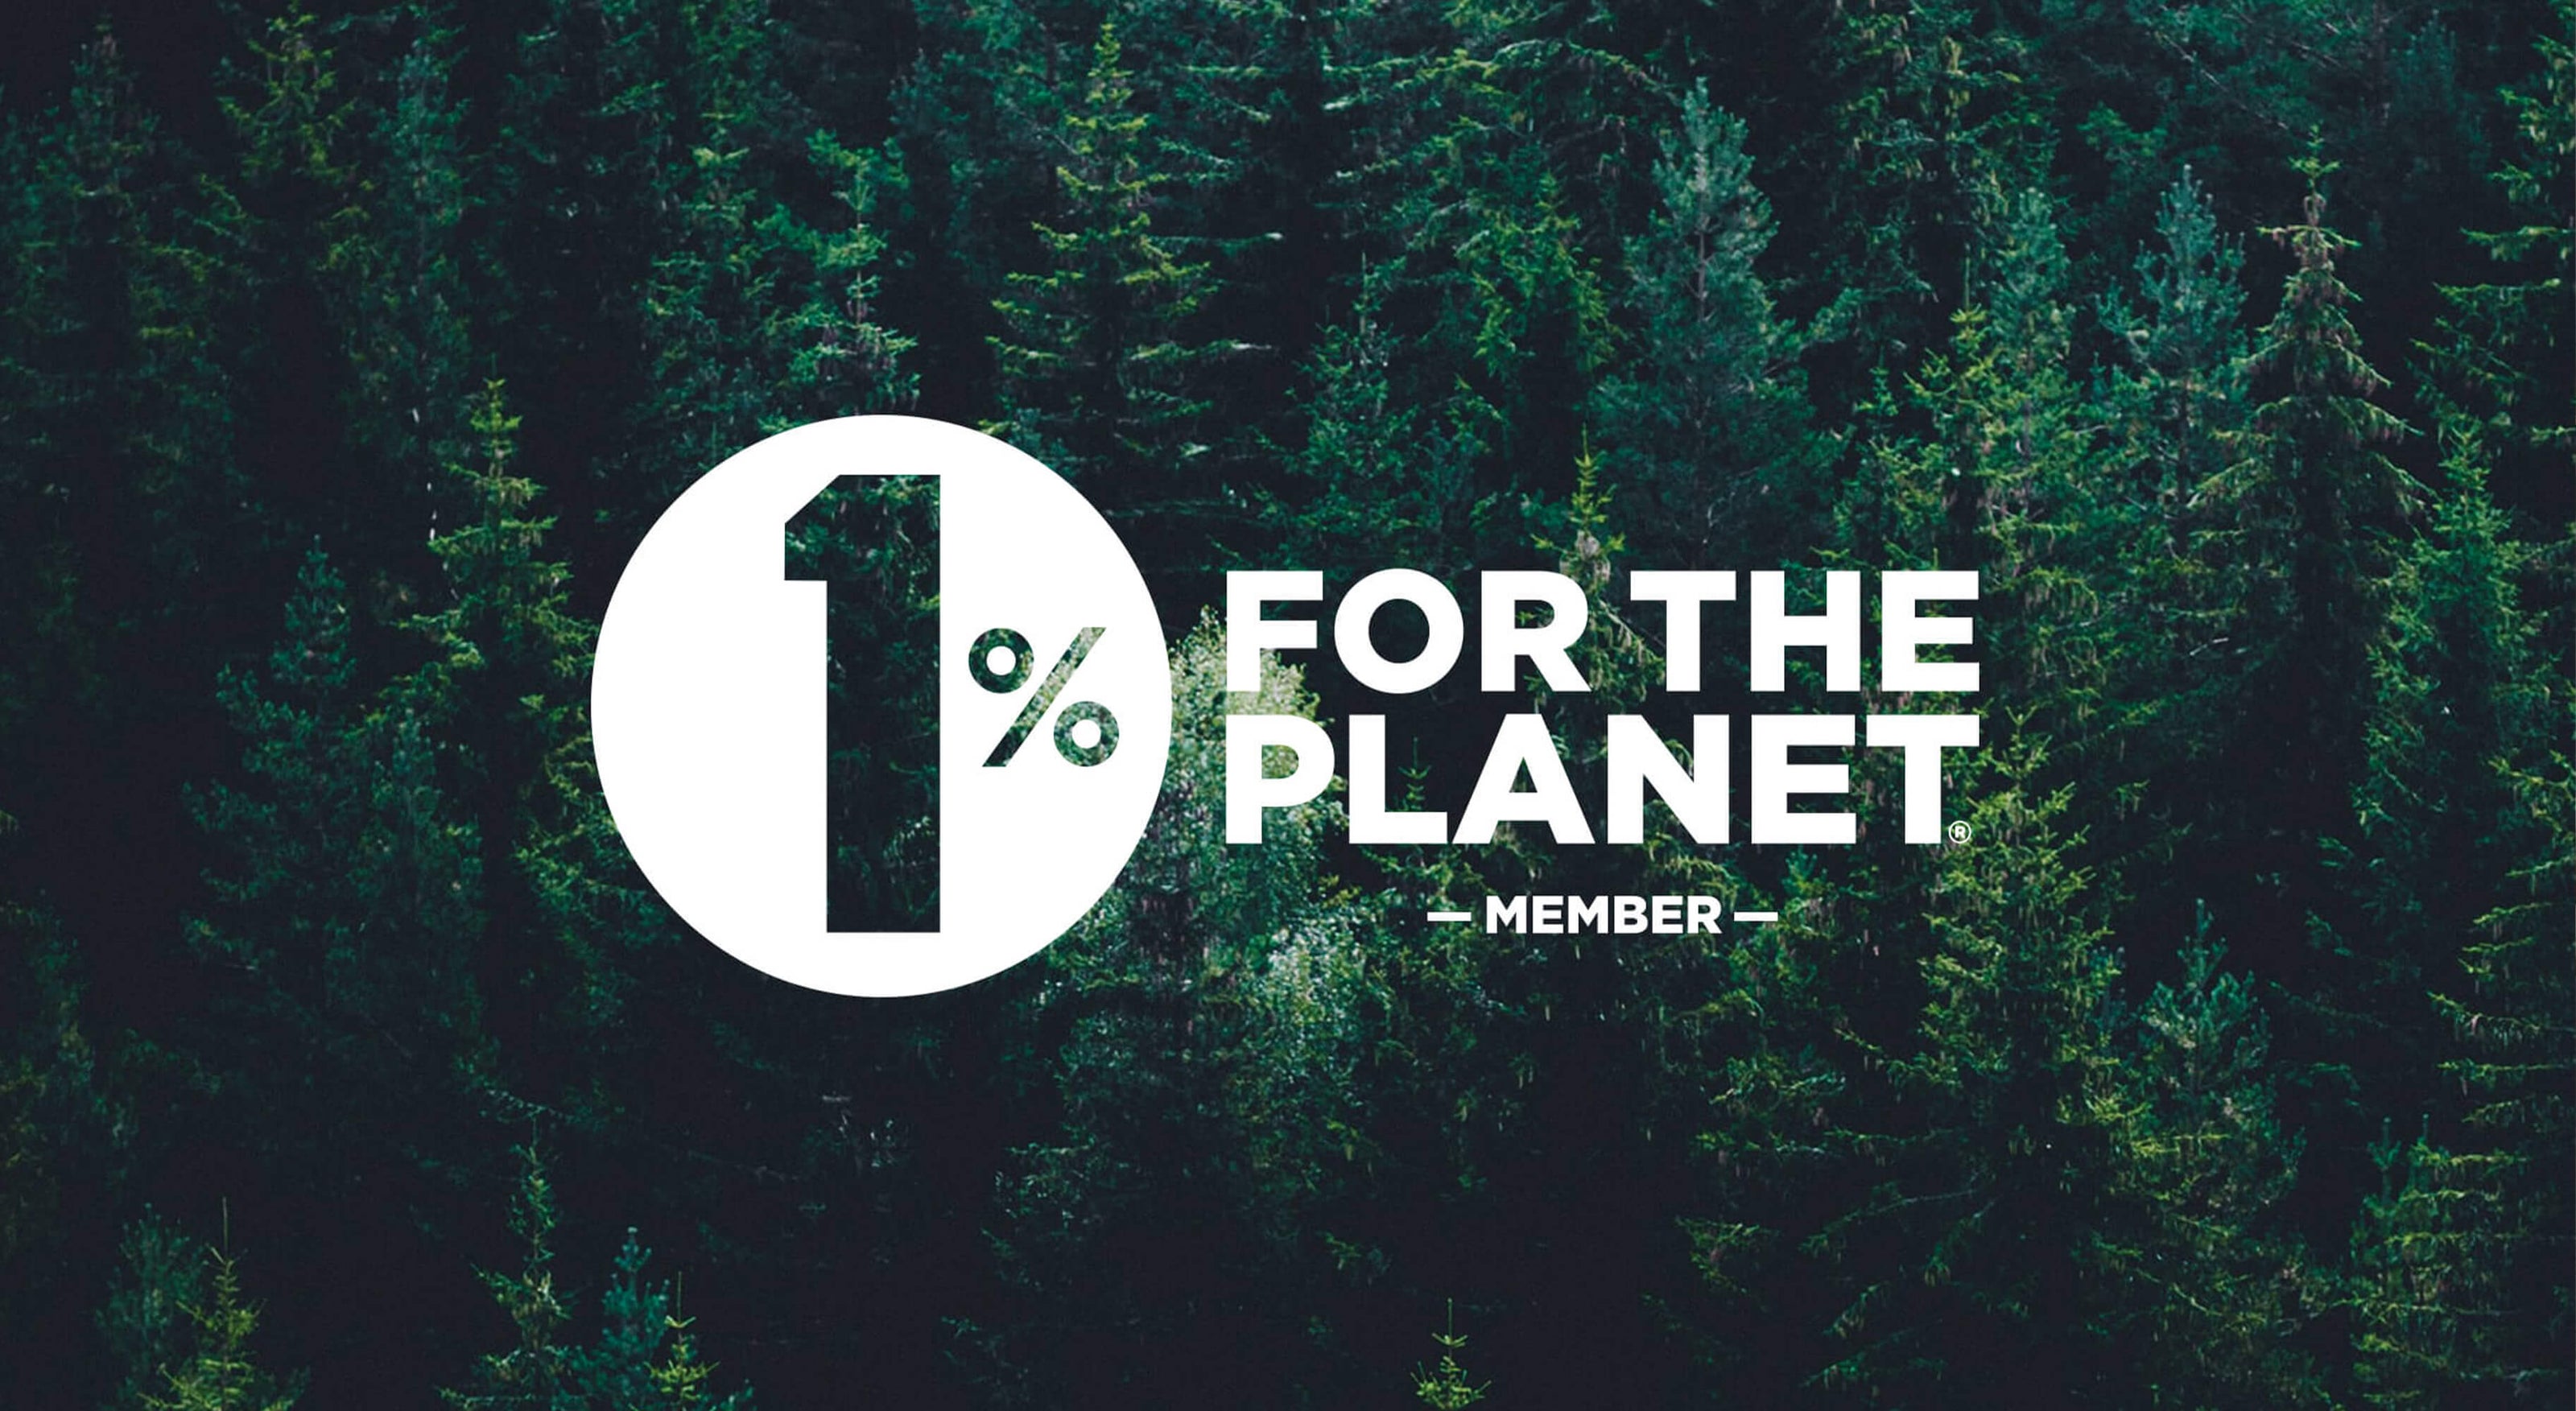 One percent for the planet logo on a dark green forest background